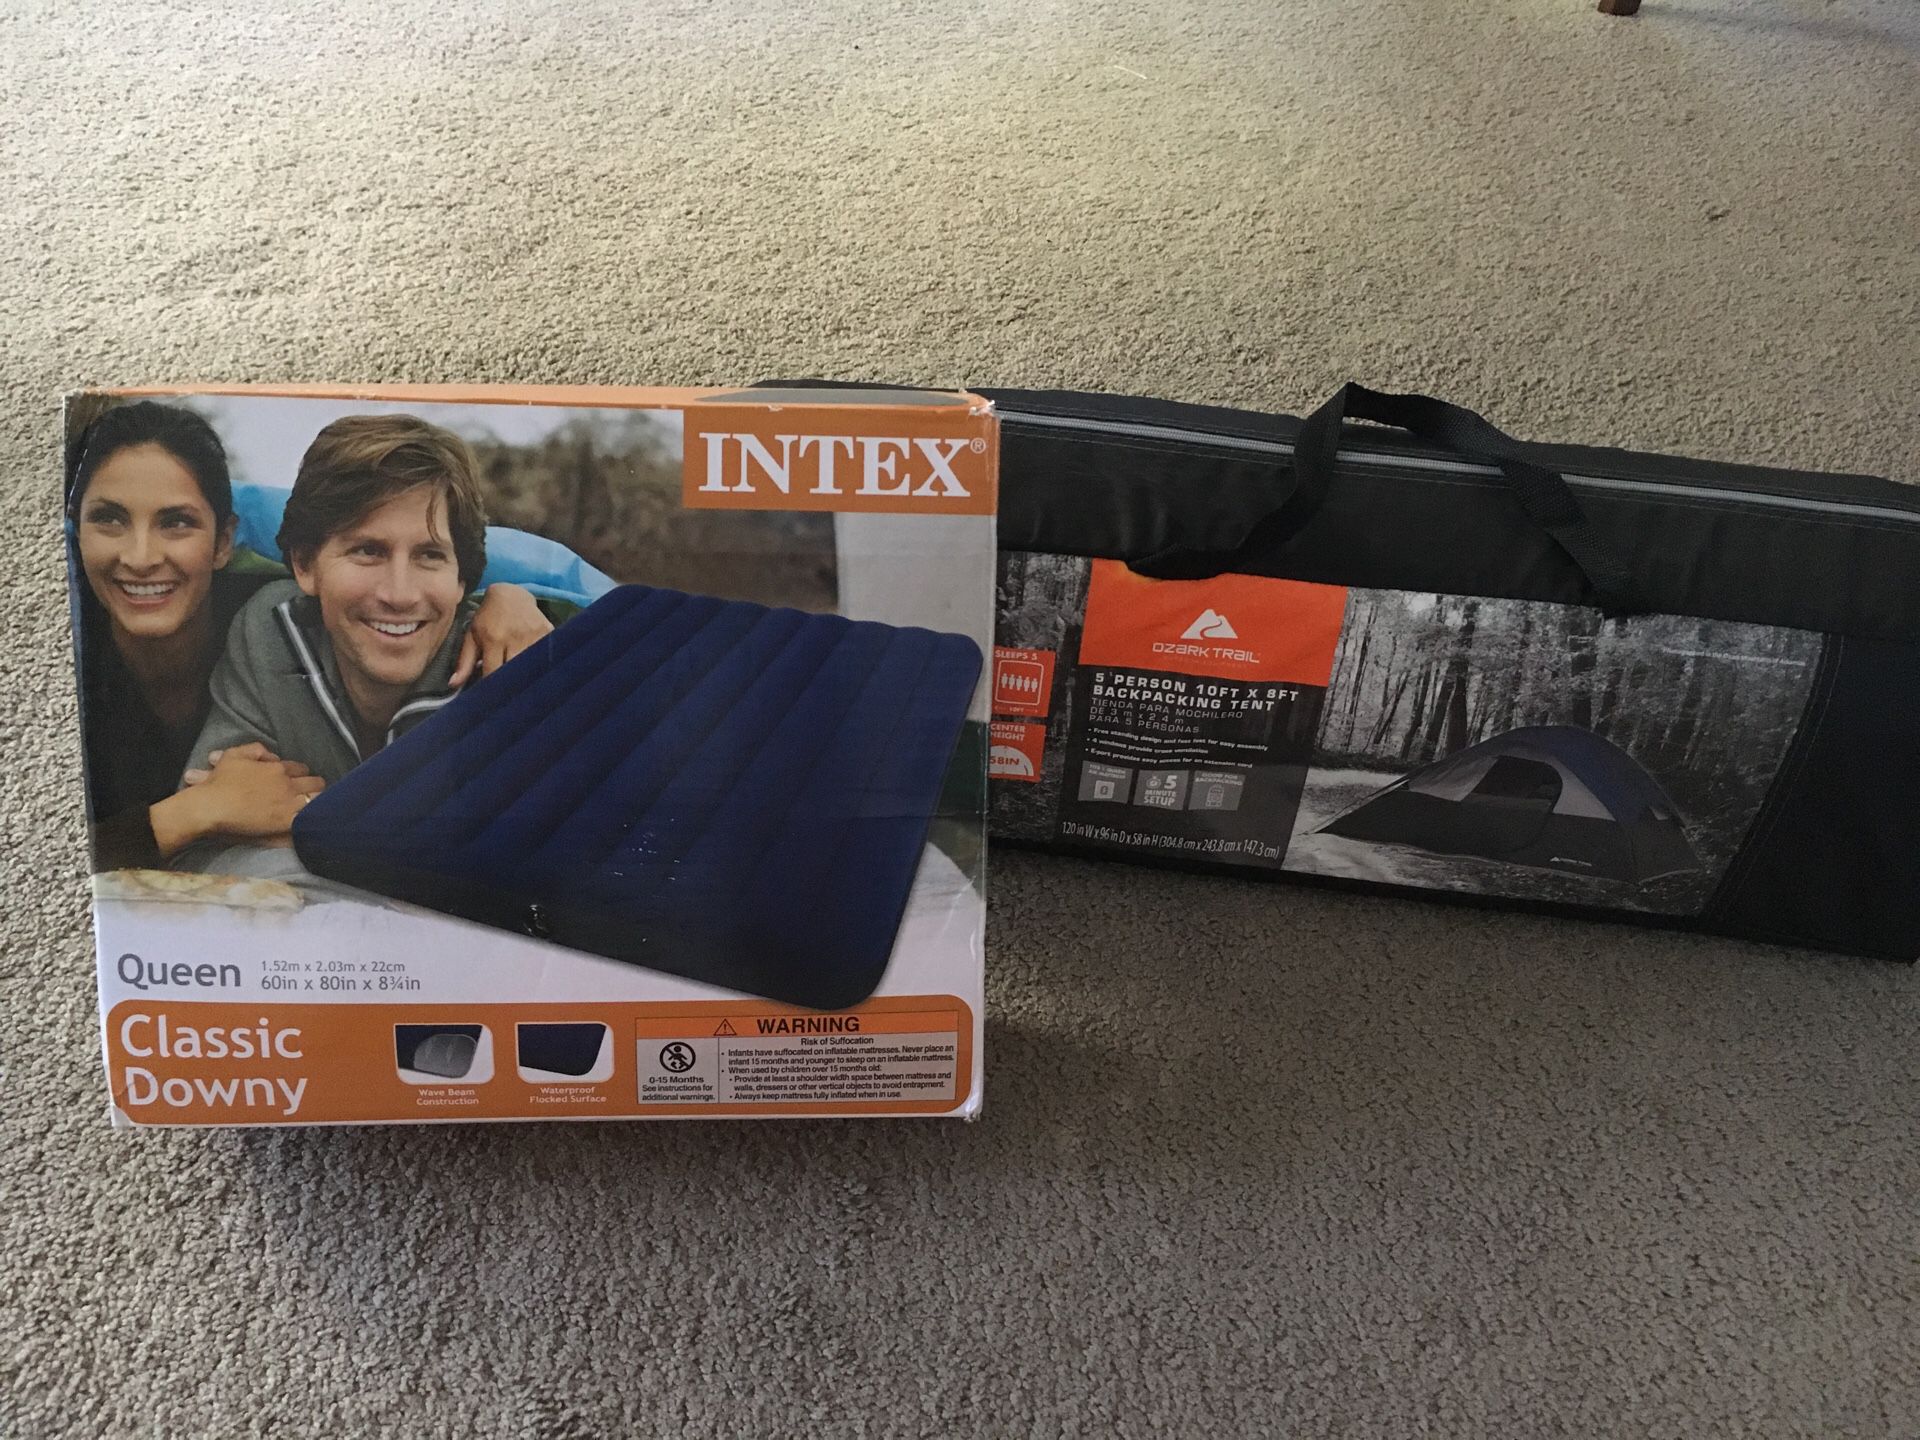 Ozark Camping Tent and intex classic downy (queen)